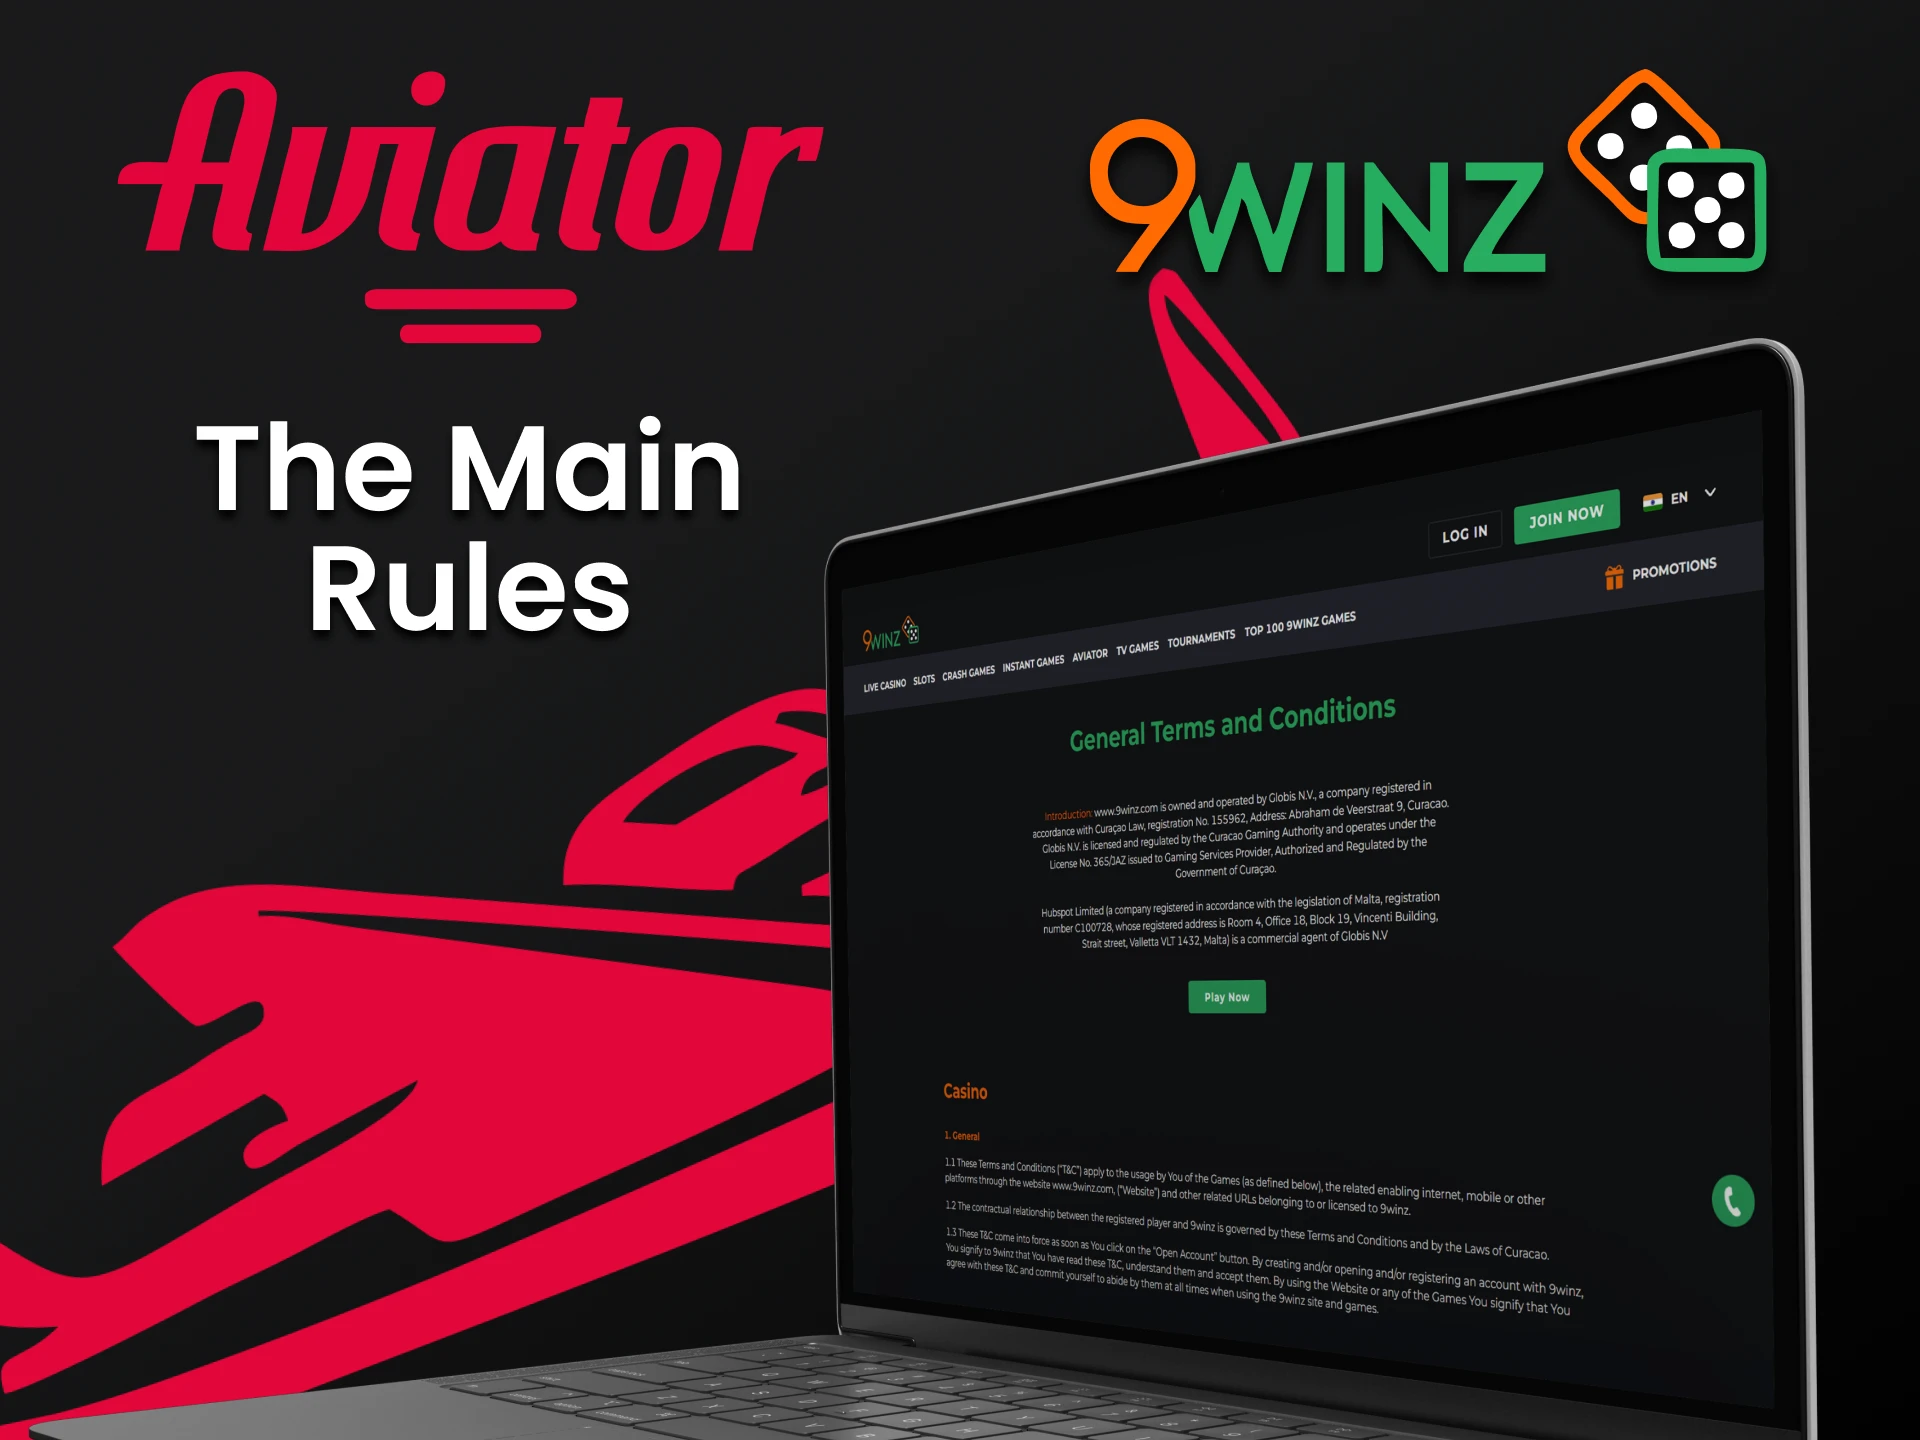 Learn about the rules of the 9winz service.